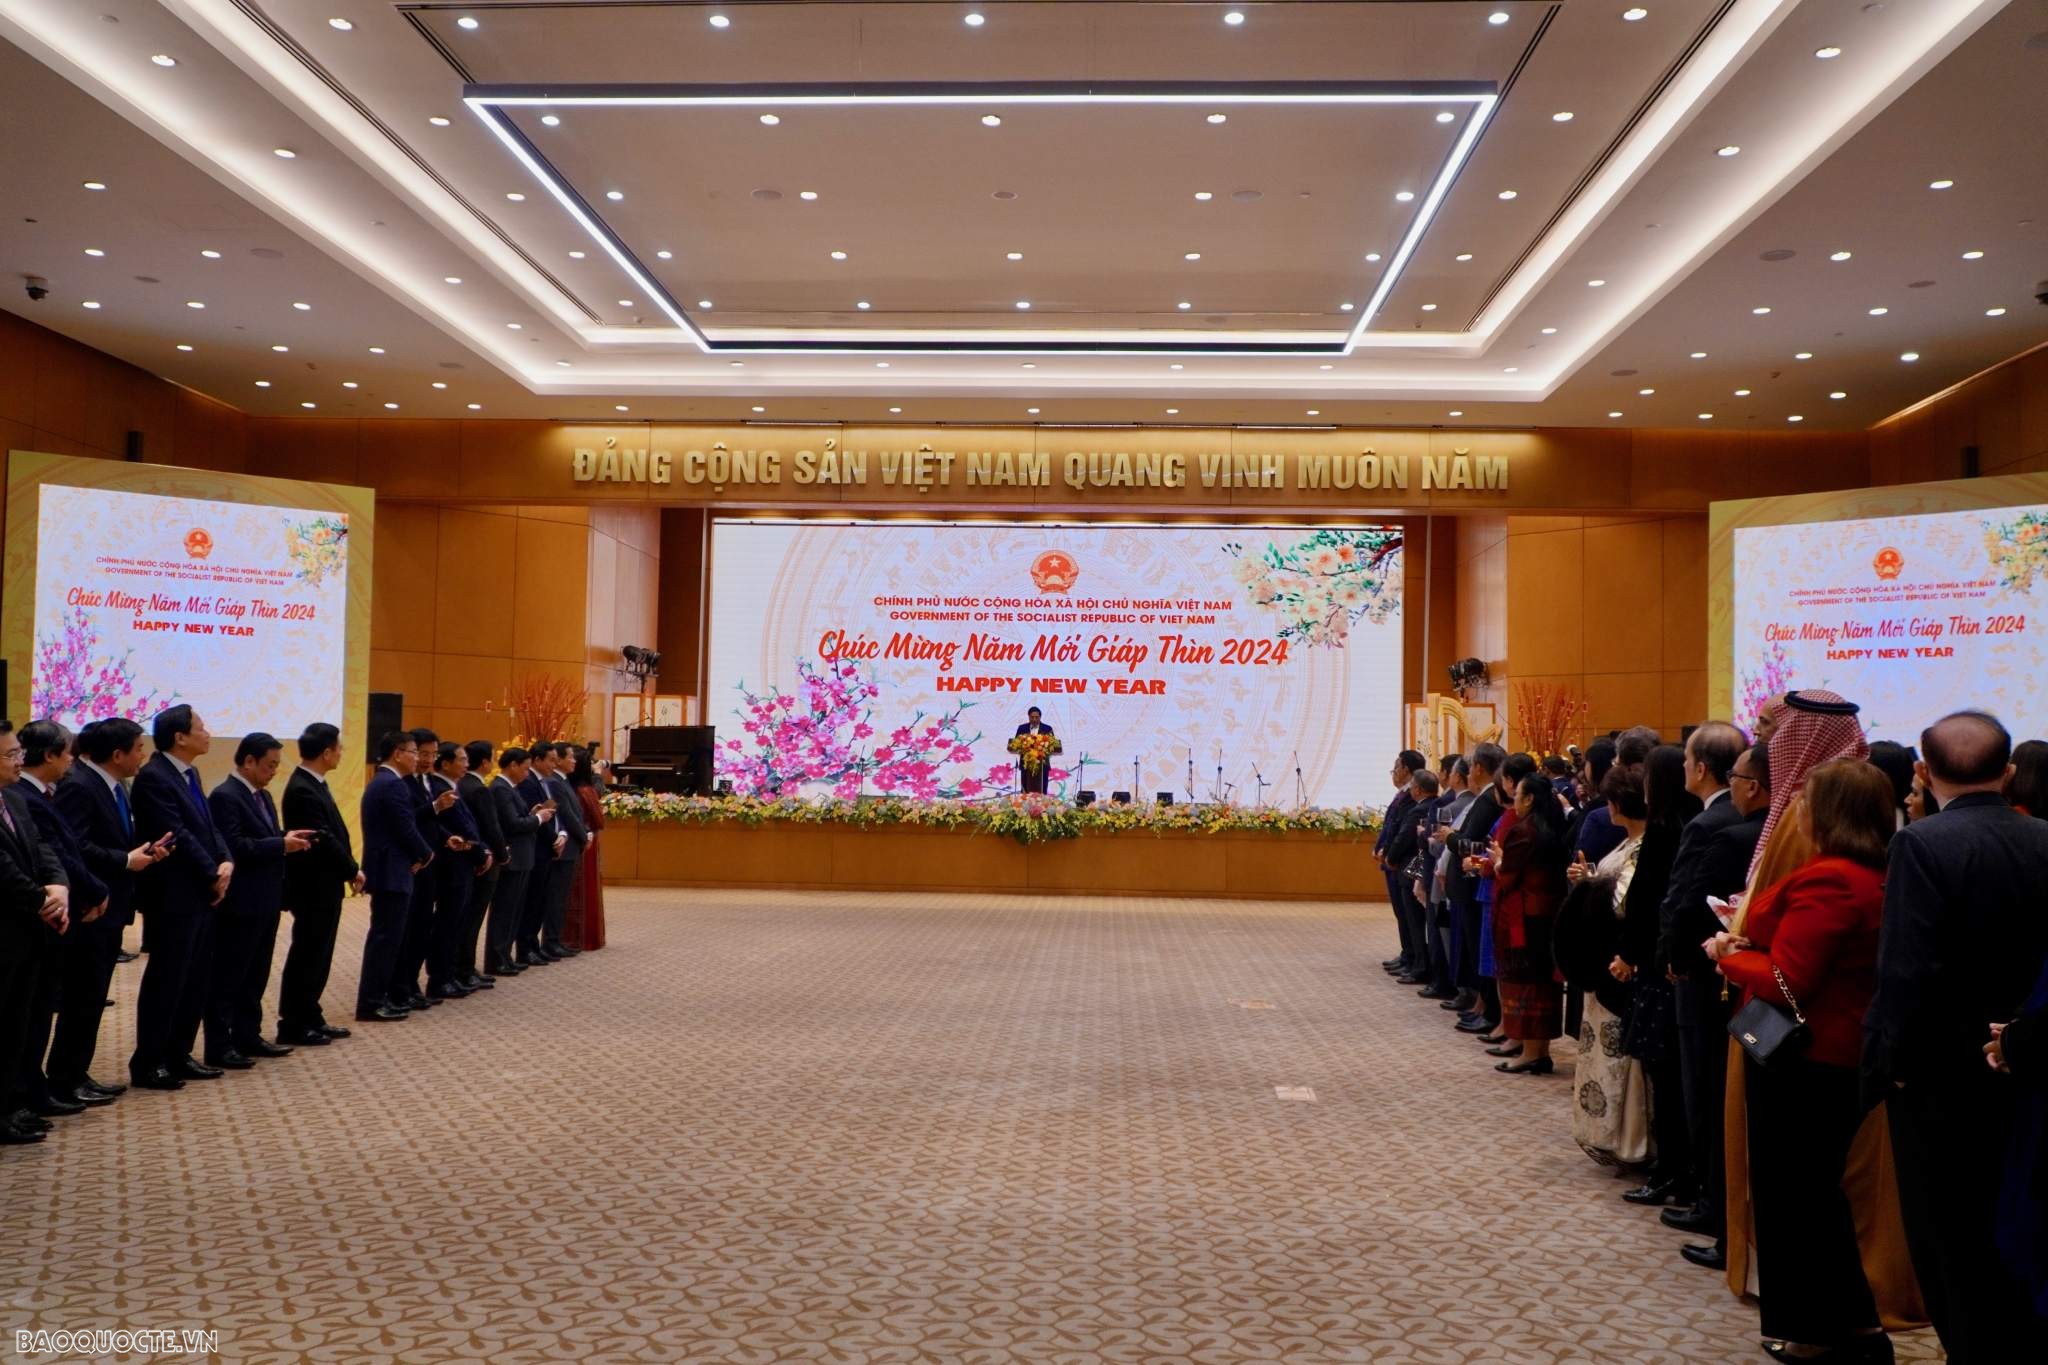 Prime Minister Pham Minh Chinh hosts Tet banquet in honour of diplomatic corps in Hanoi